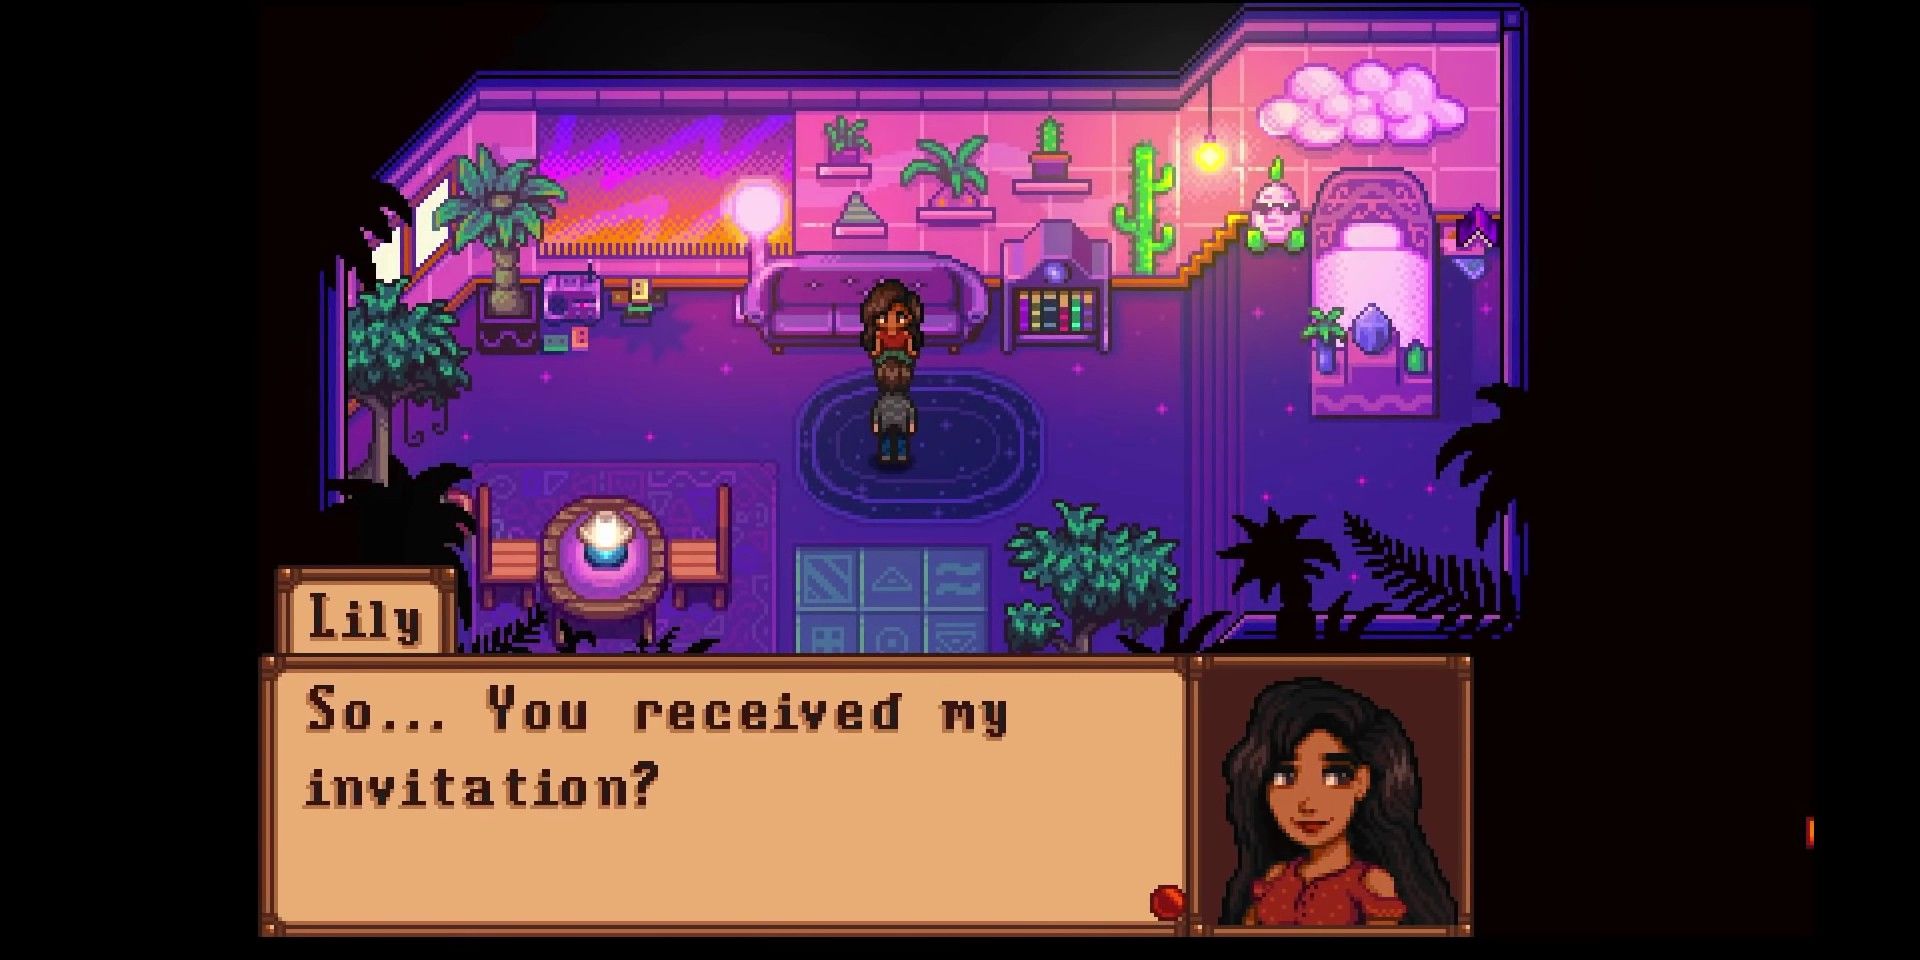 A Haunted Chocolatier character named Lily talking to the player character, asking if they've received an invitation she sent.